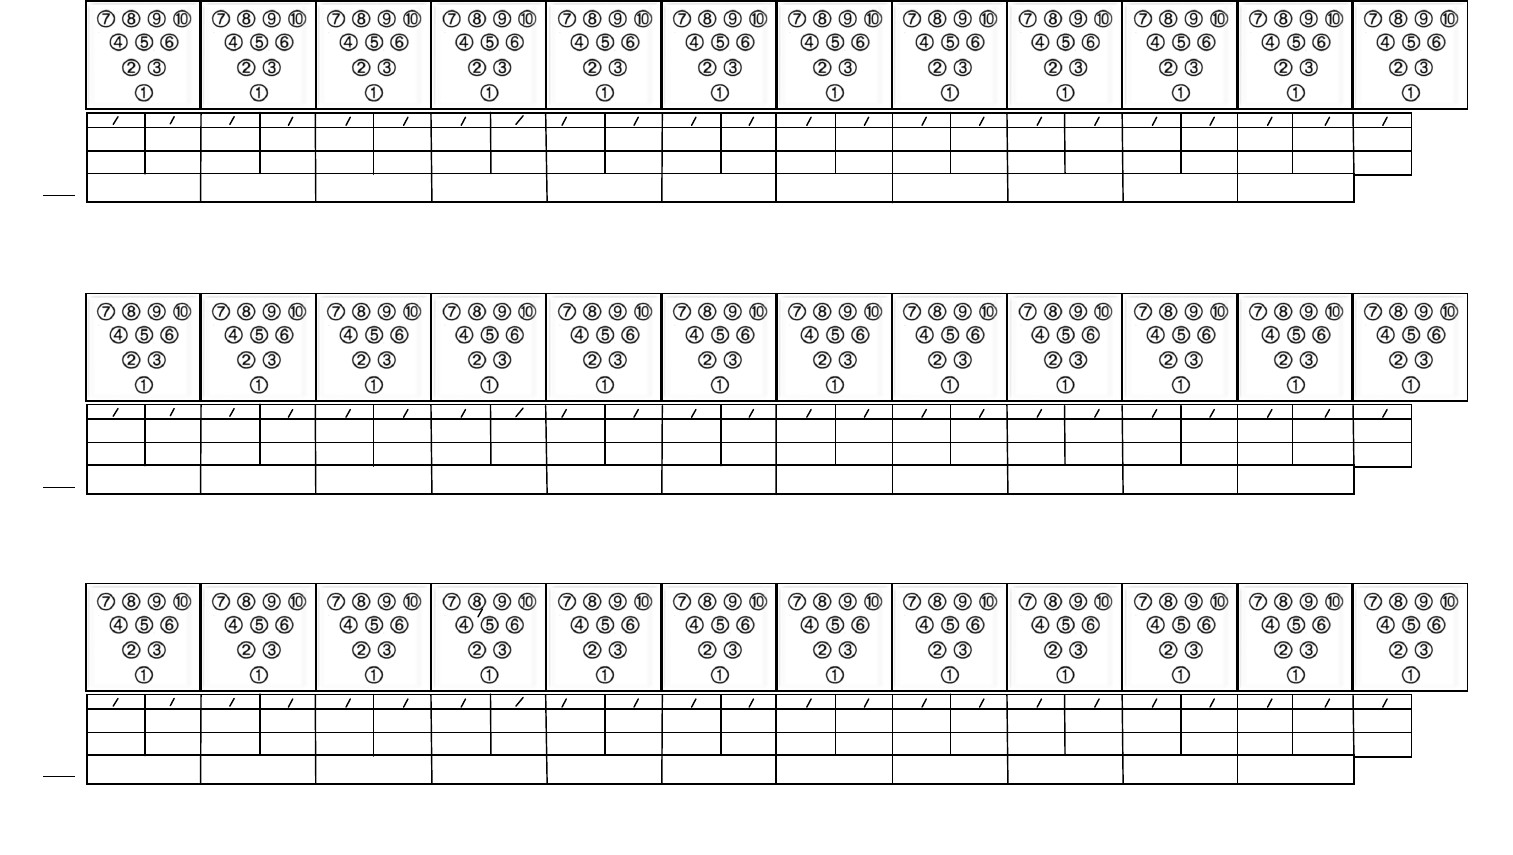 Bowling Score Sheet Excel Download Printable Bowling Score Sheet with Pins